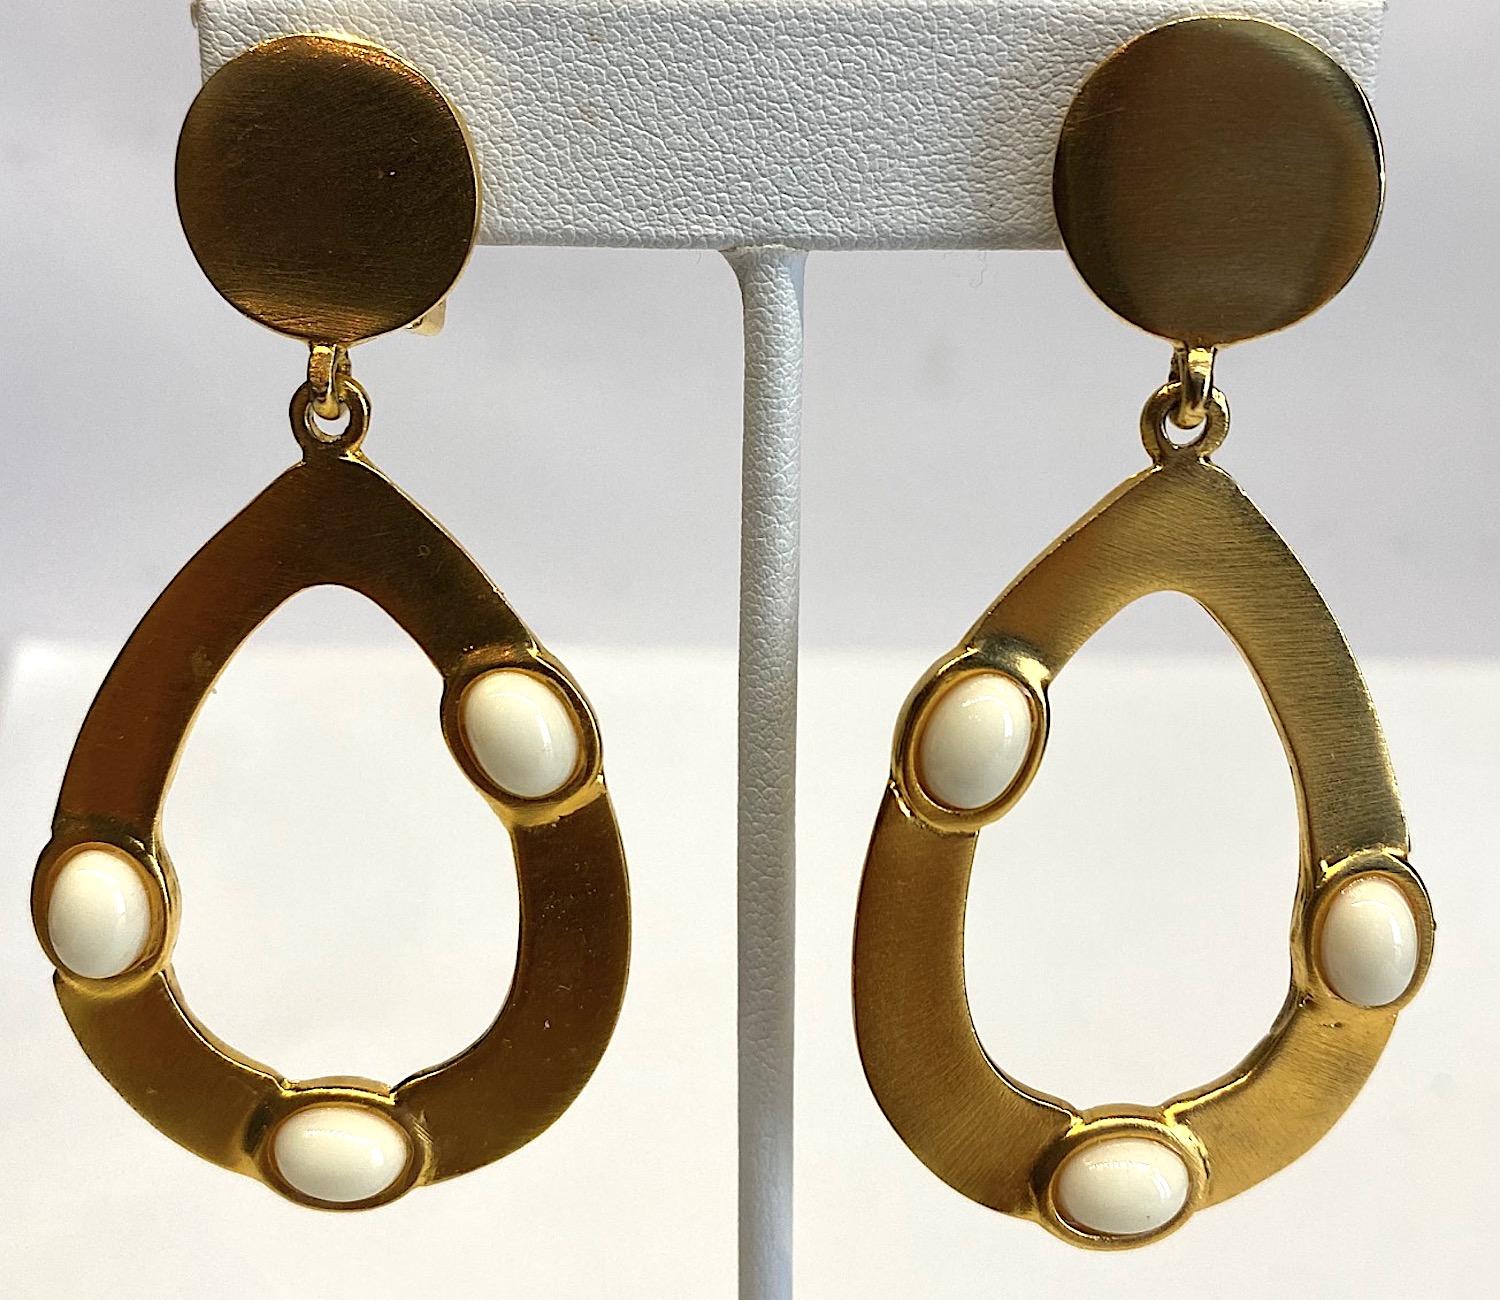 Kenneth Lane 1980s satin gold tone pear shape pendant hoop earrings with oval white cabochons. Each earring is 1.38 inches wide and 2.75 inches long. The top round button has a clip back and measures .63 of an inch in diameter. The pear shape